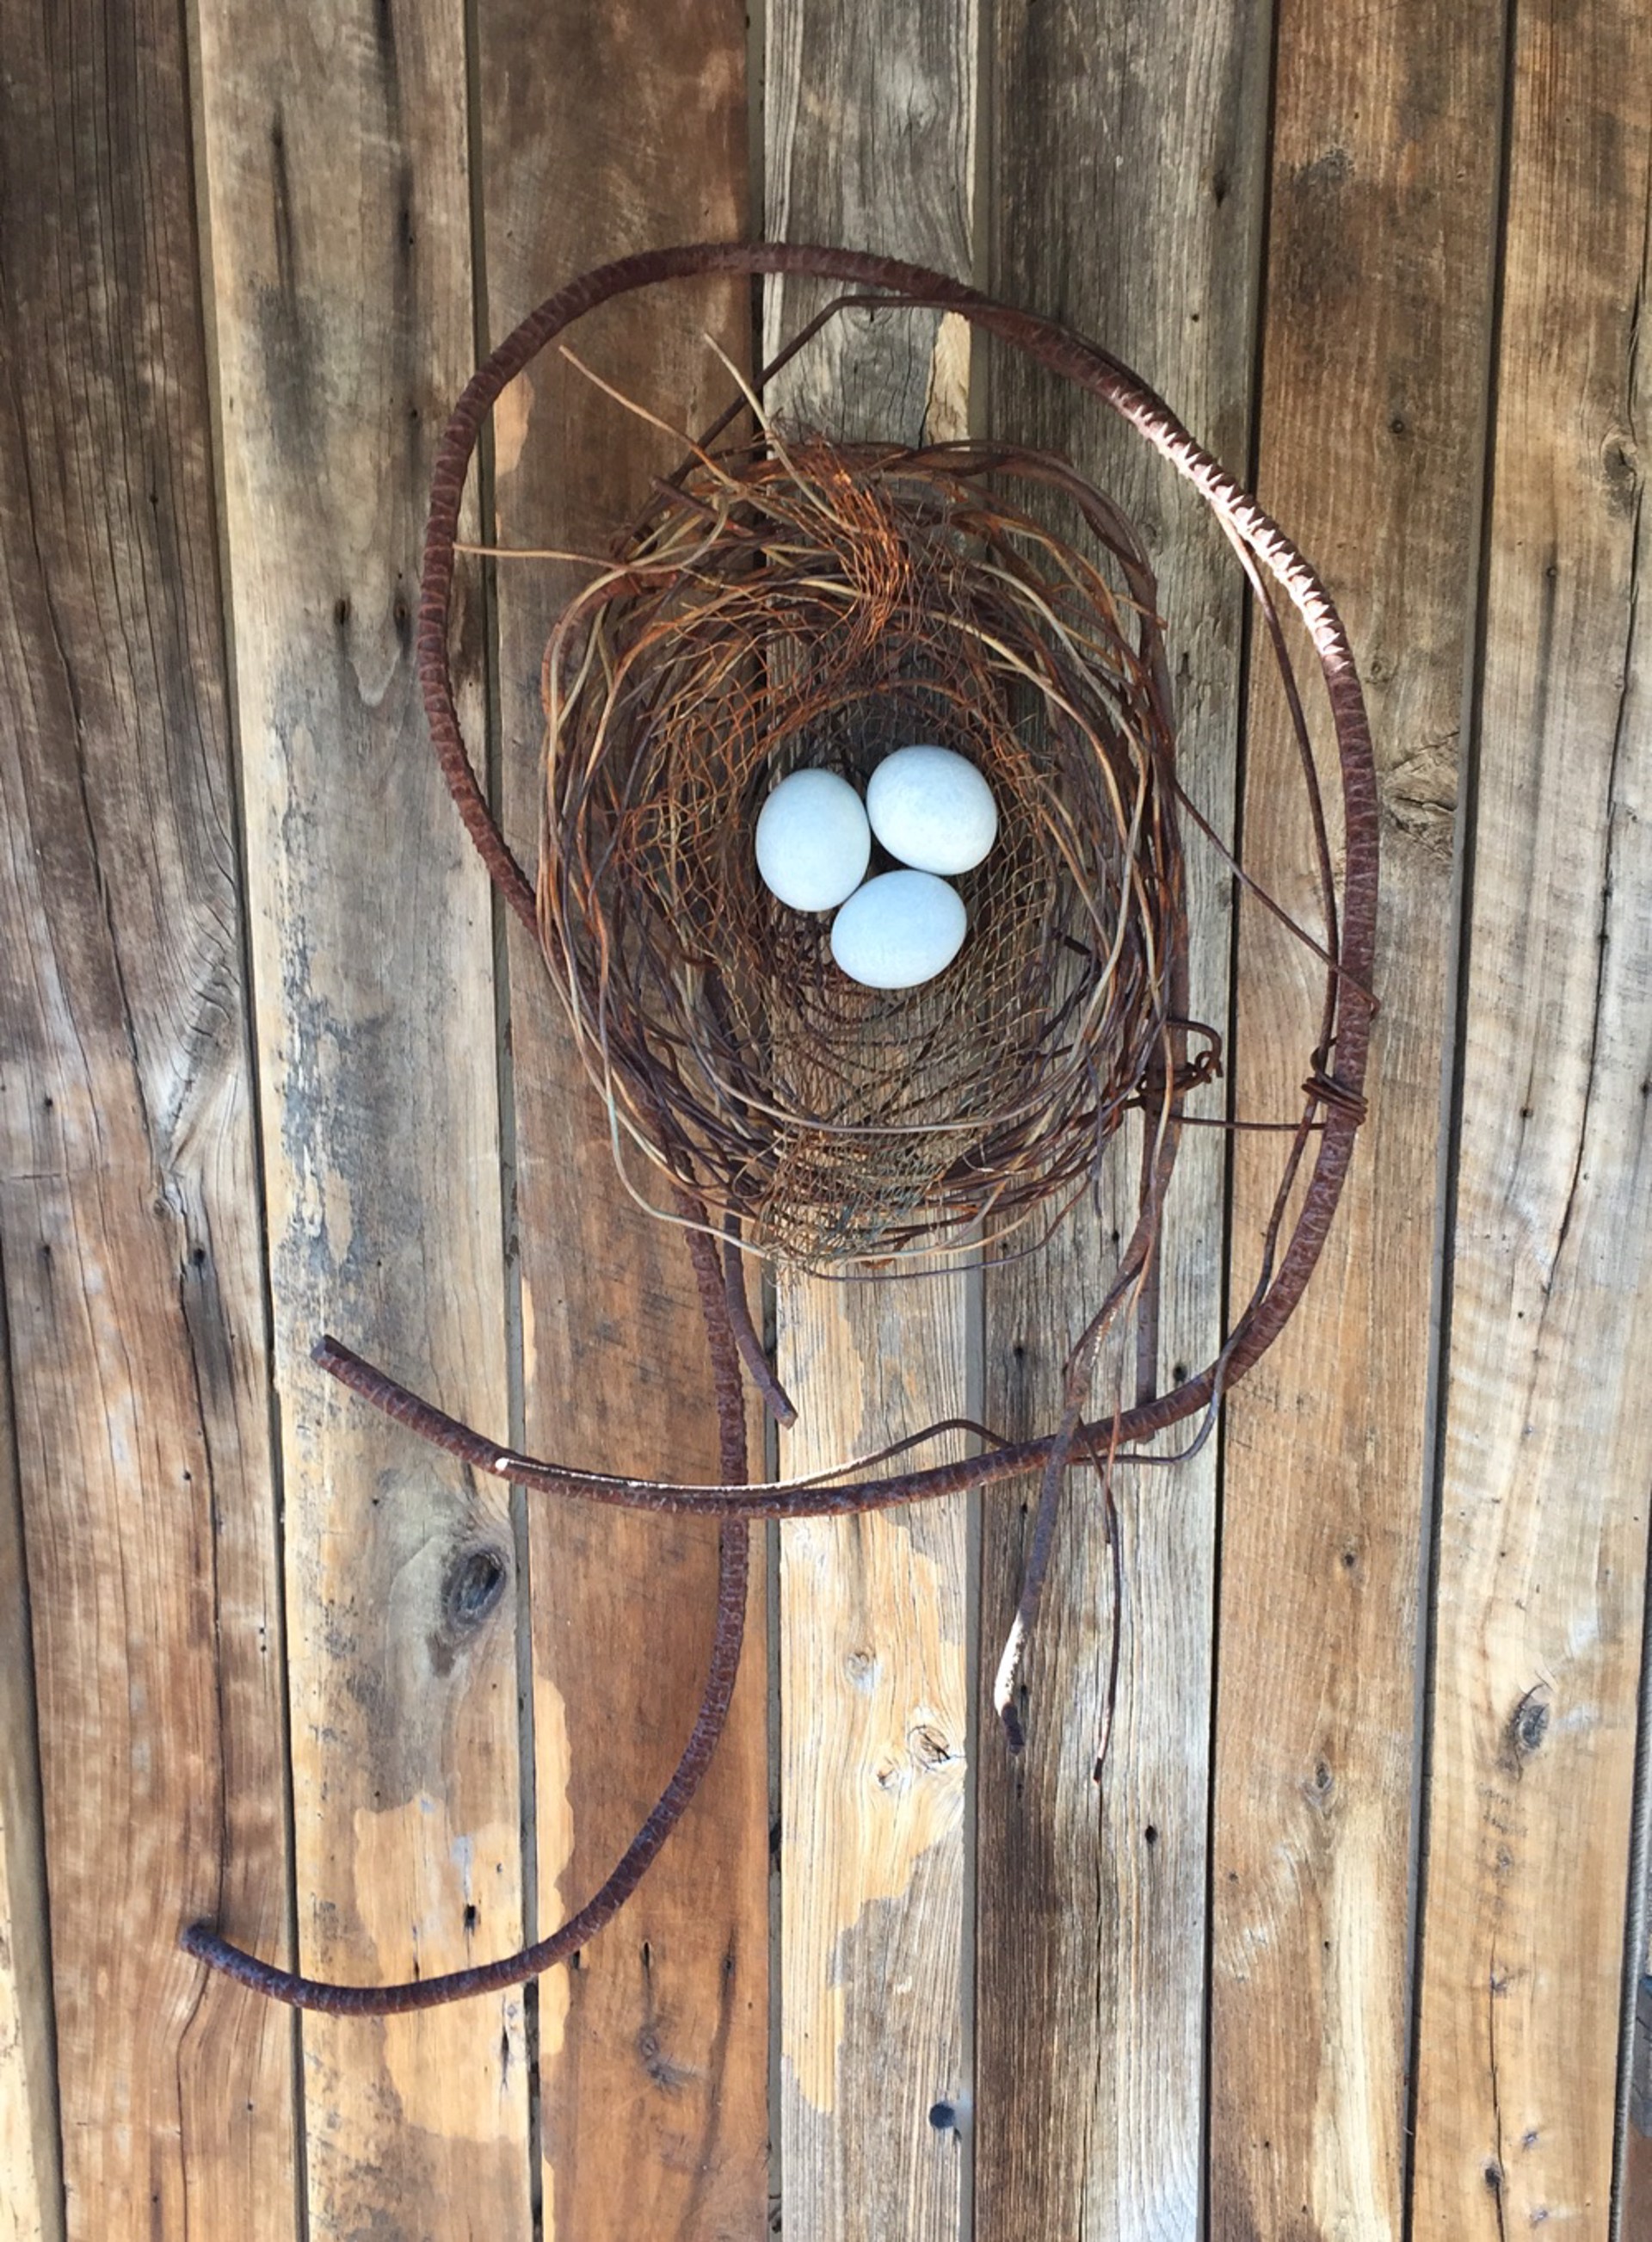 Hand Woven Wire Nest With 3 Light Turquoise Ceramic Eggs - 1242 by Phil Lichtenhan